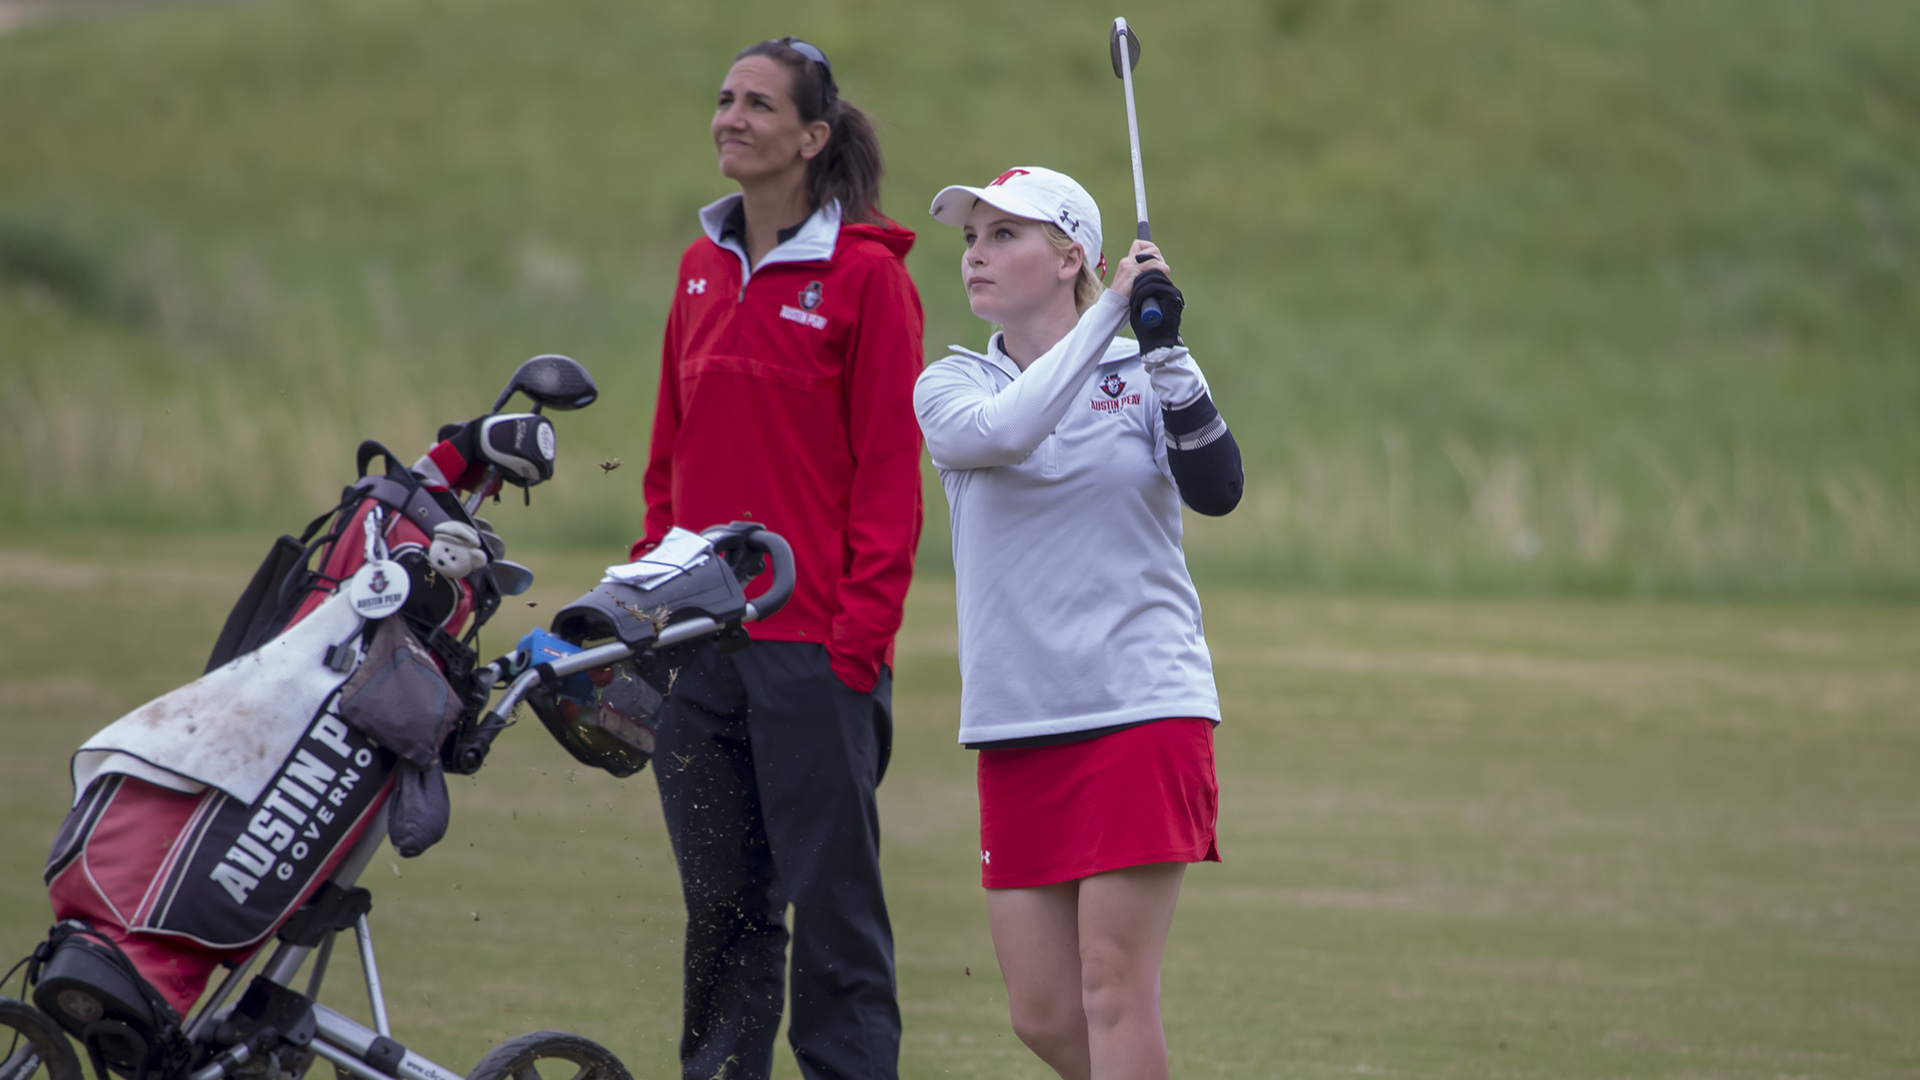 Stamps hits ball during Golf Tournament